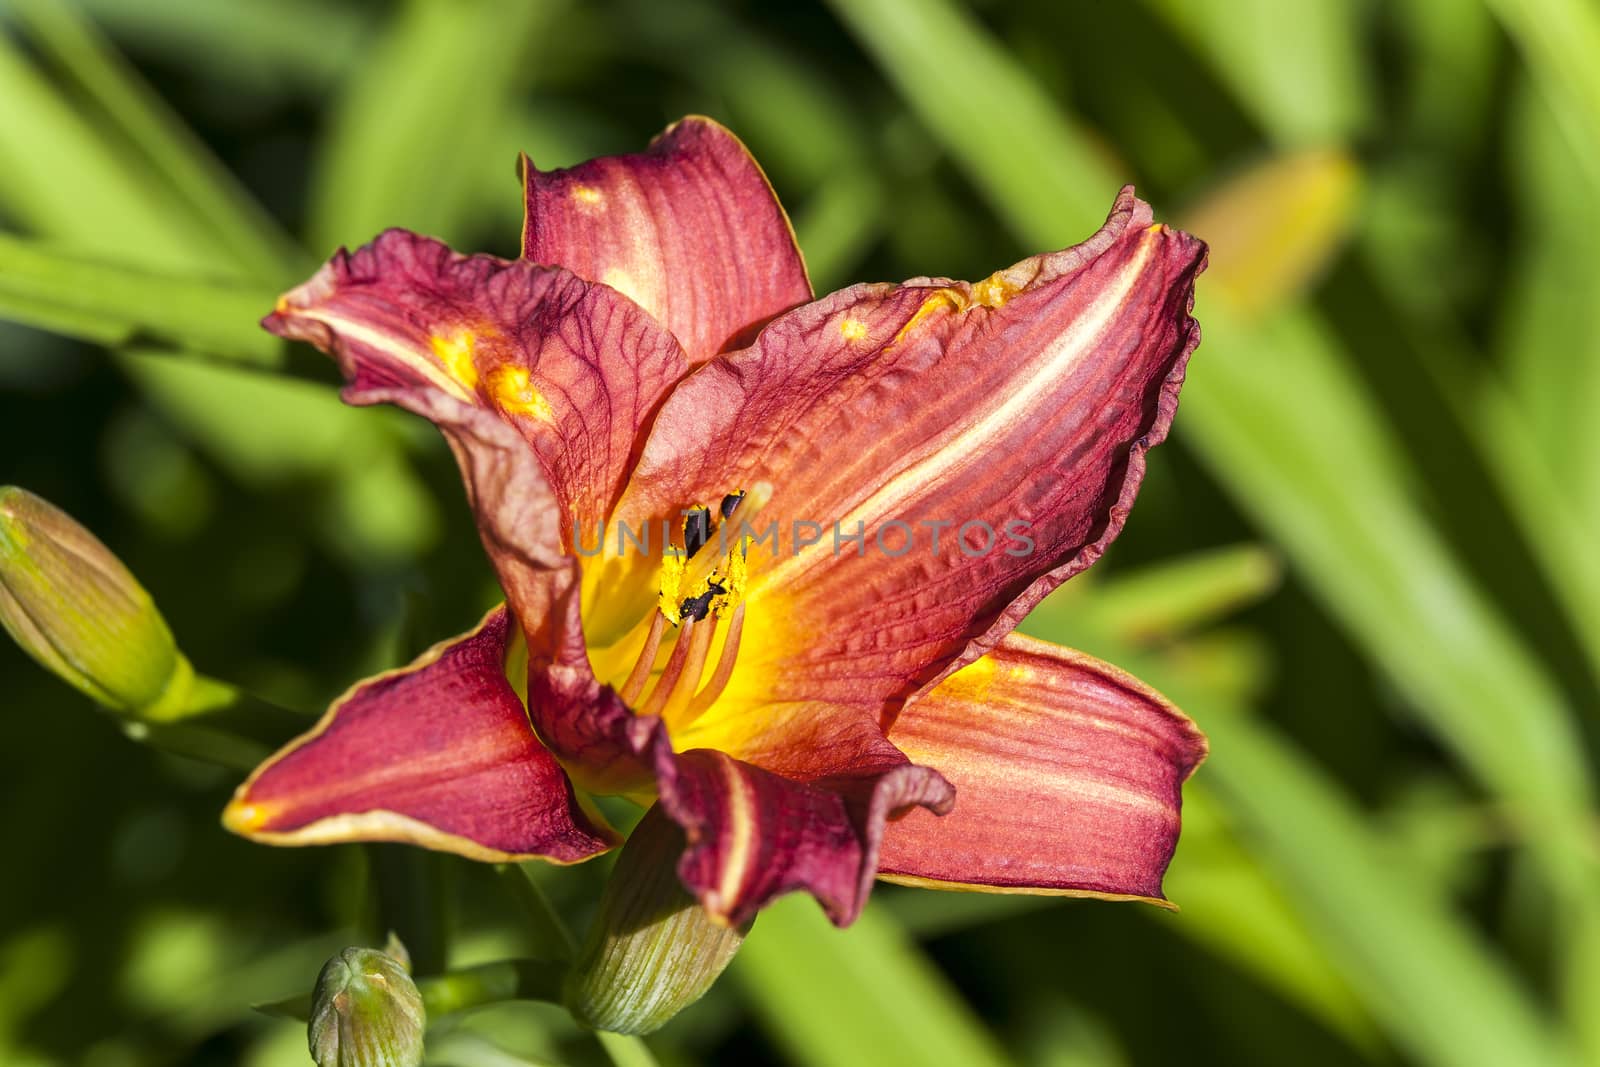 Hemerocallis 'Little Wine Cup' a spring flowering plant commonly known as daylily